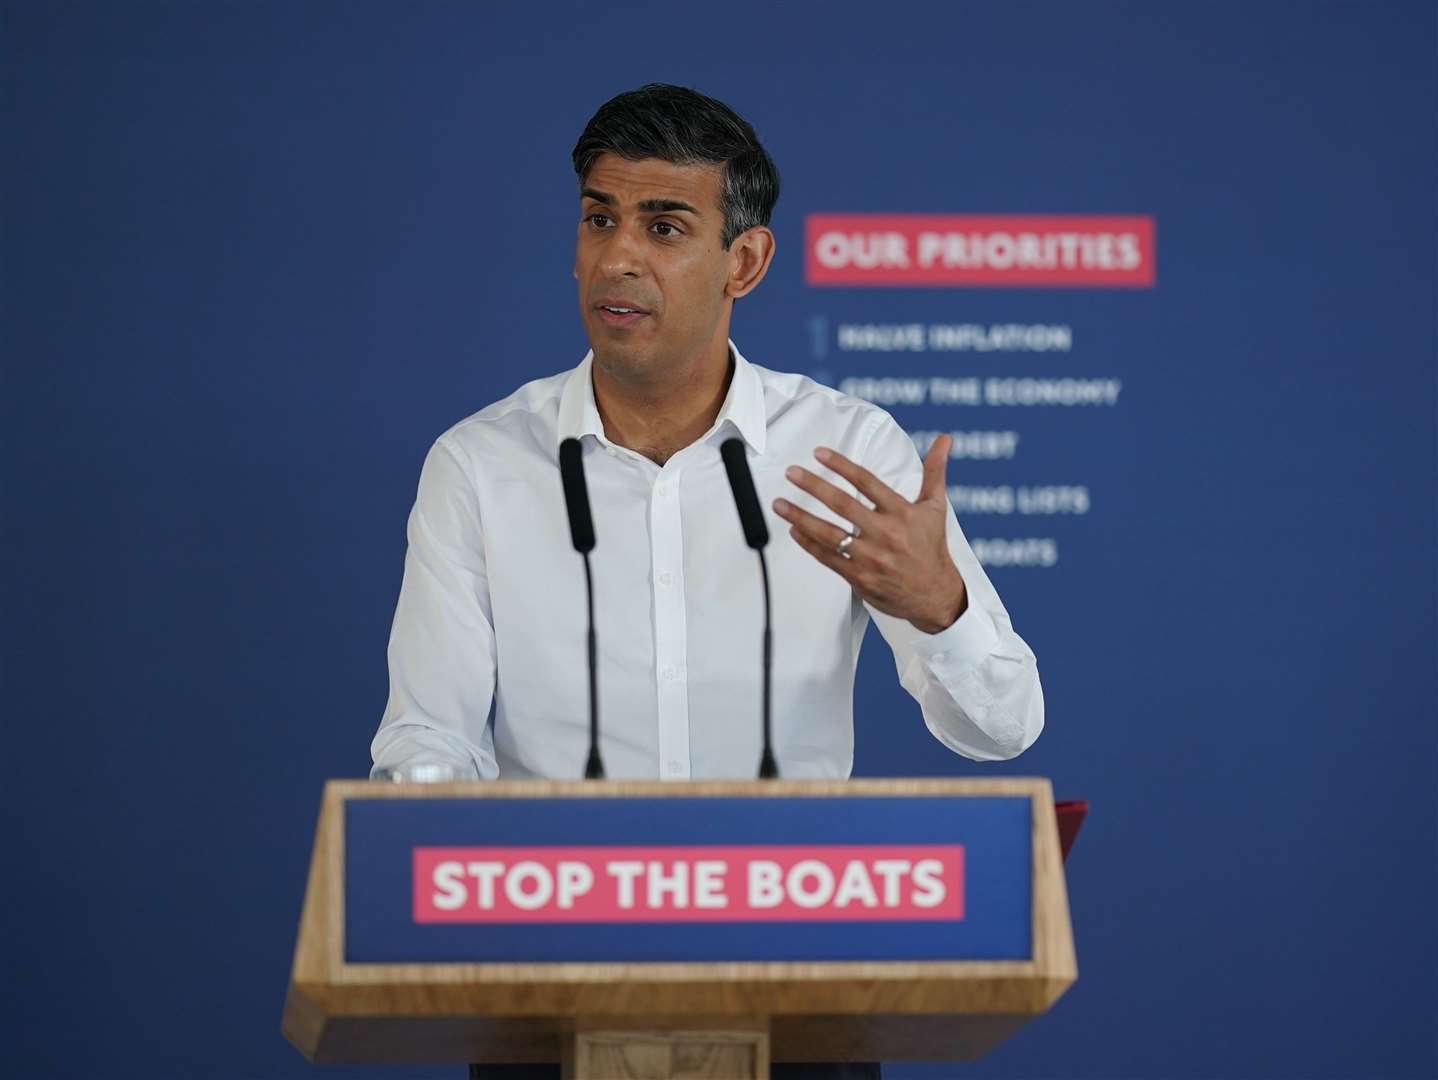 Rishi Sunak has made stopping Channel boat crossings one of his top five priorities ahead of next year’s likely general election (Yui Mok/PA)